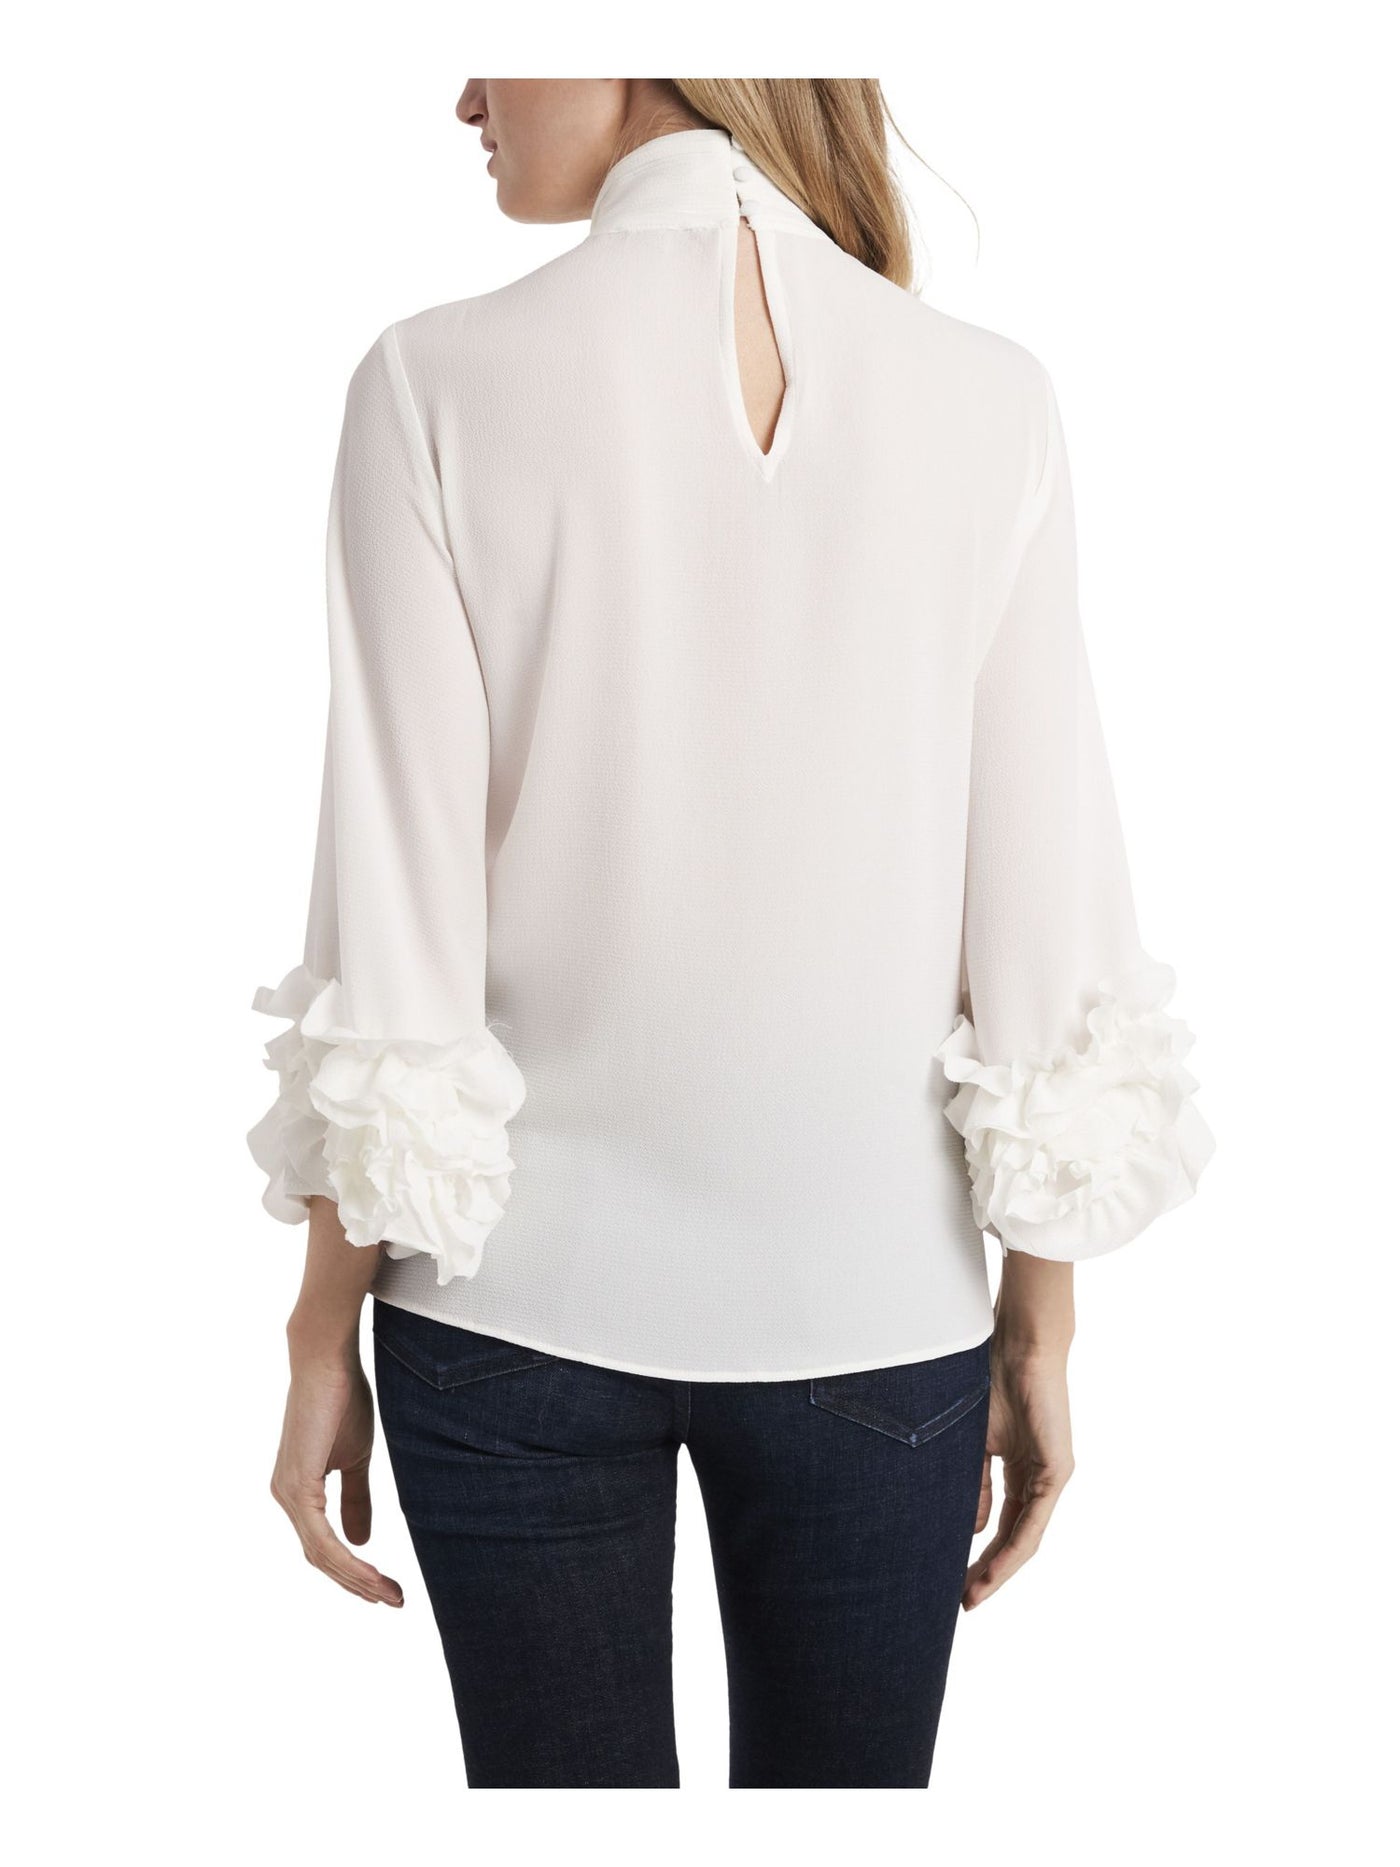 VINCE CAMUTO Womens White Ruffled 3/4 Sleeve Mock Neck Wear To Work Top XS